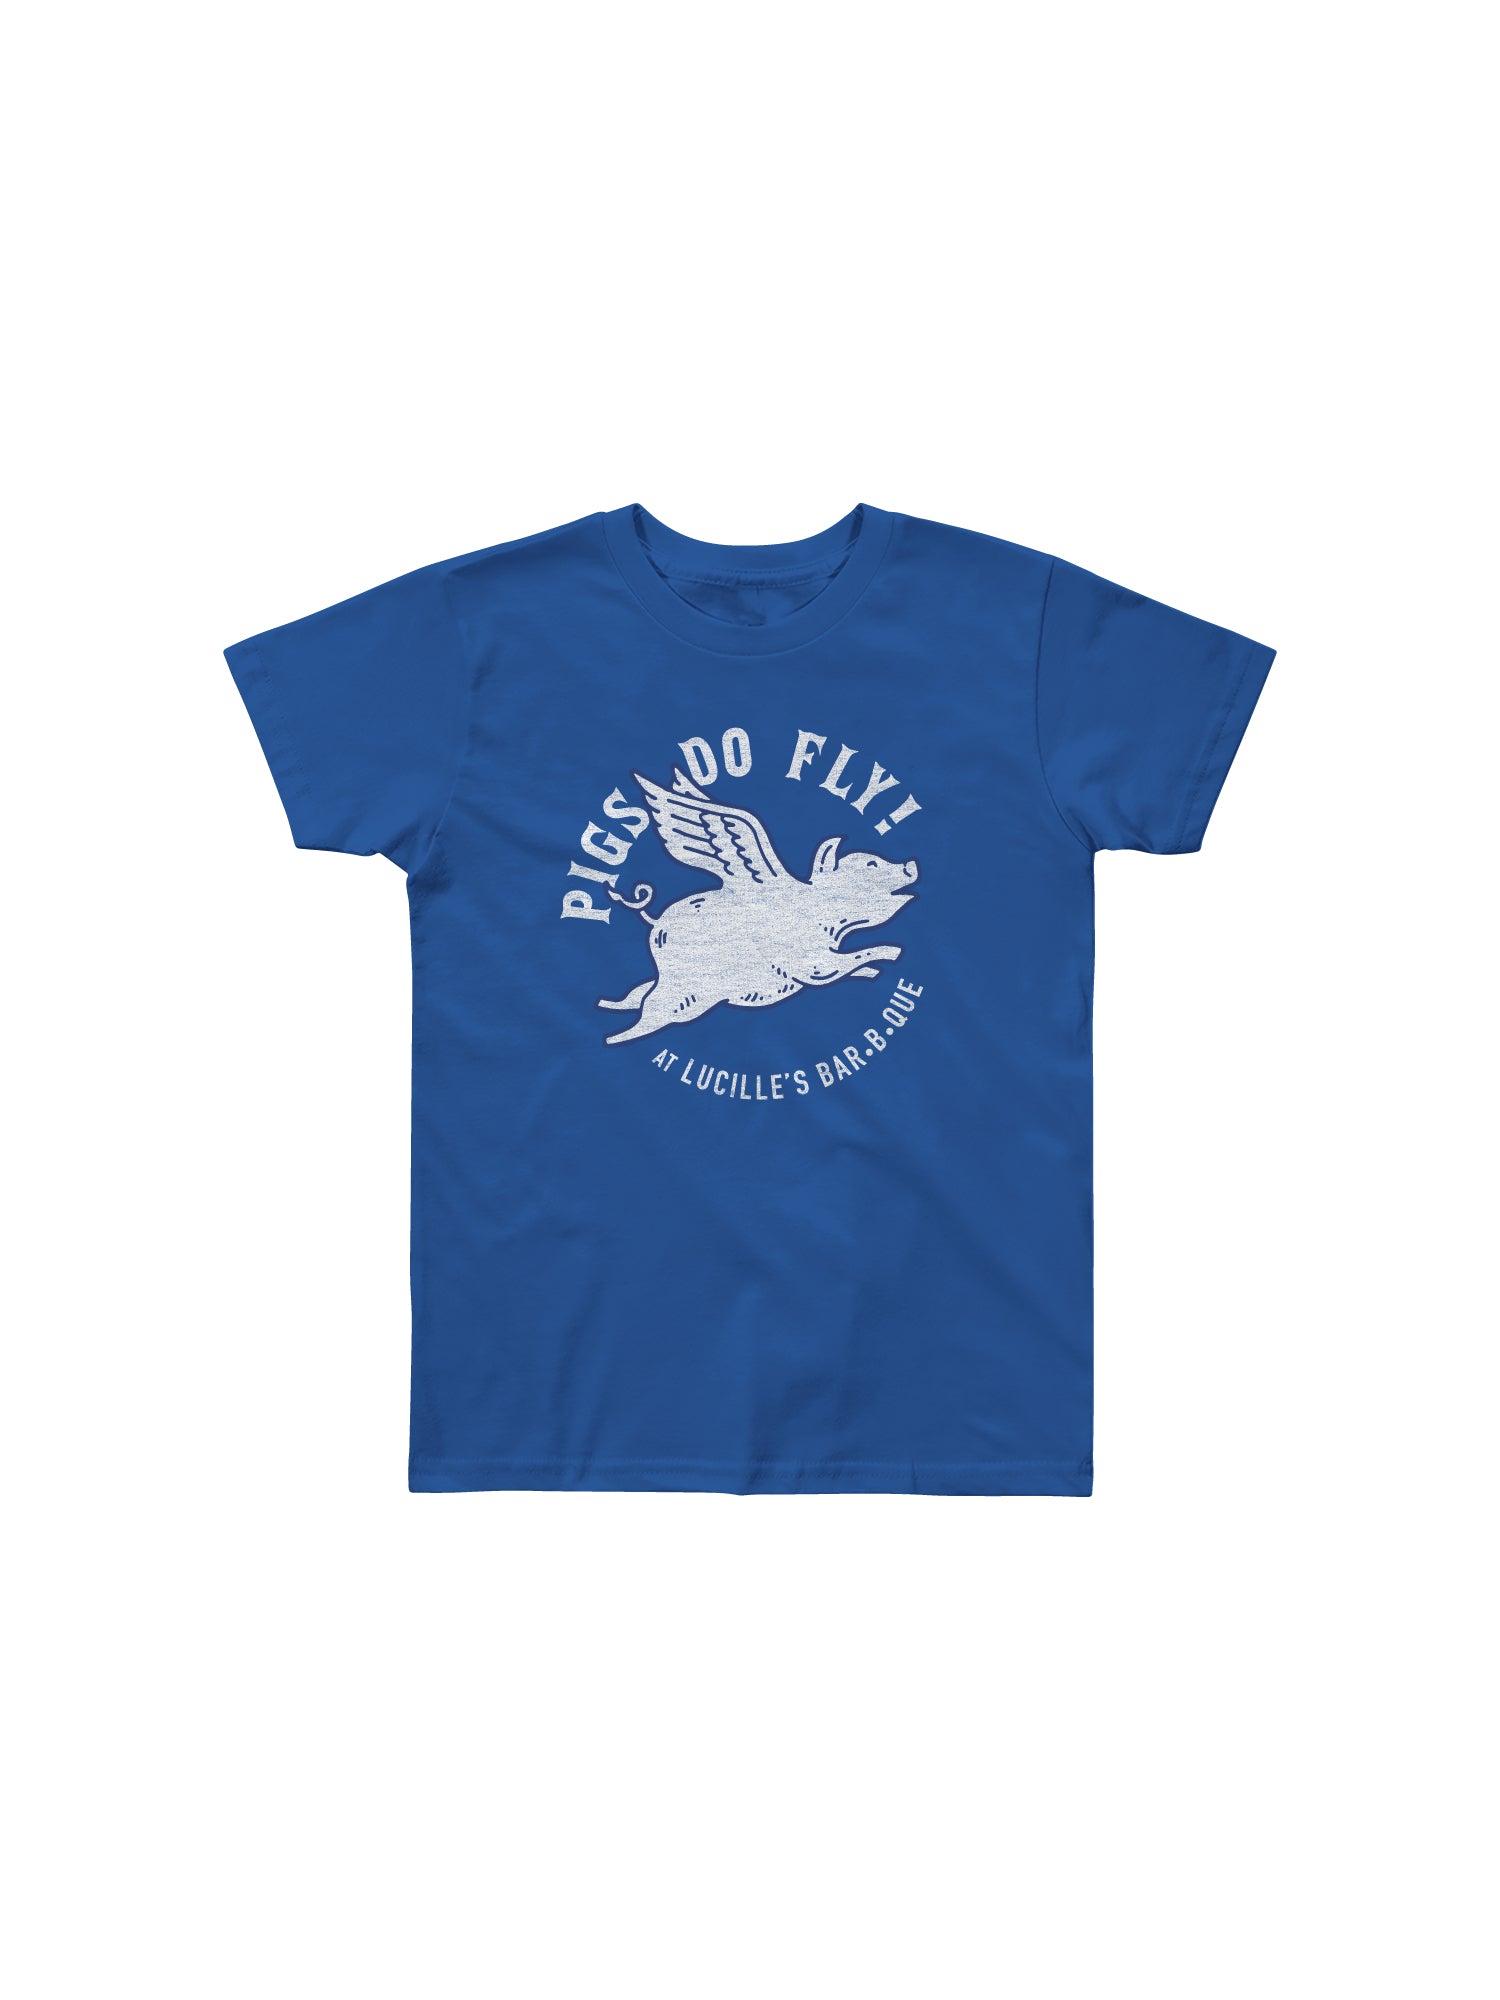 PIGS DO FLY YOUTH TSHIRT (ROYAL BLUE) - Anderson Bros Design and Supply